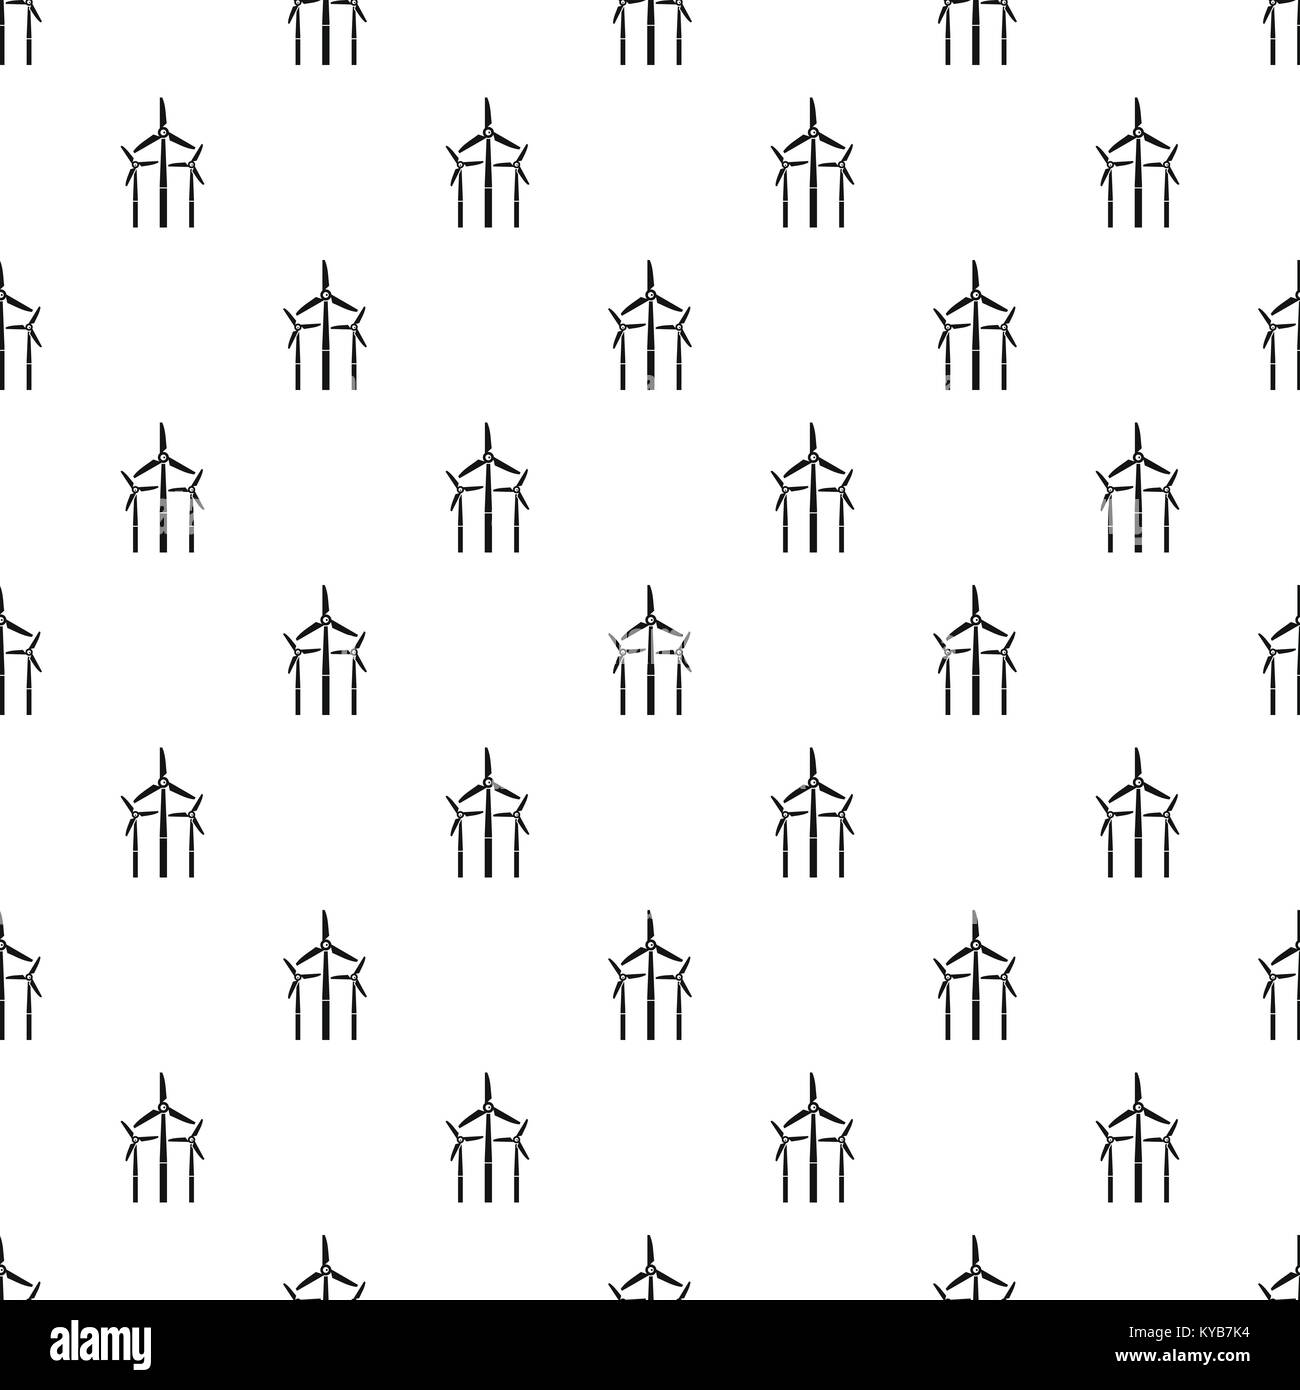 House pattern vector Stock Vector